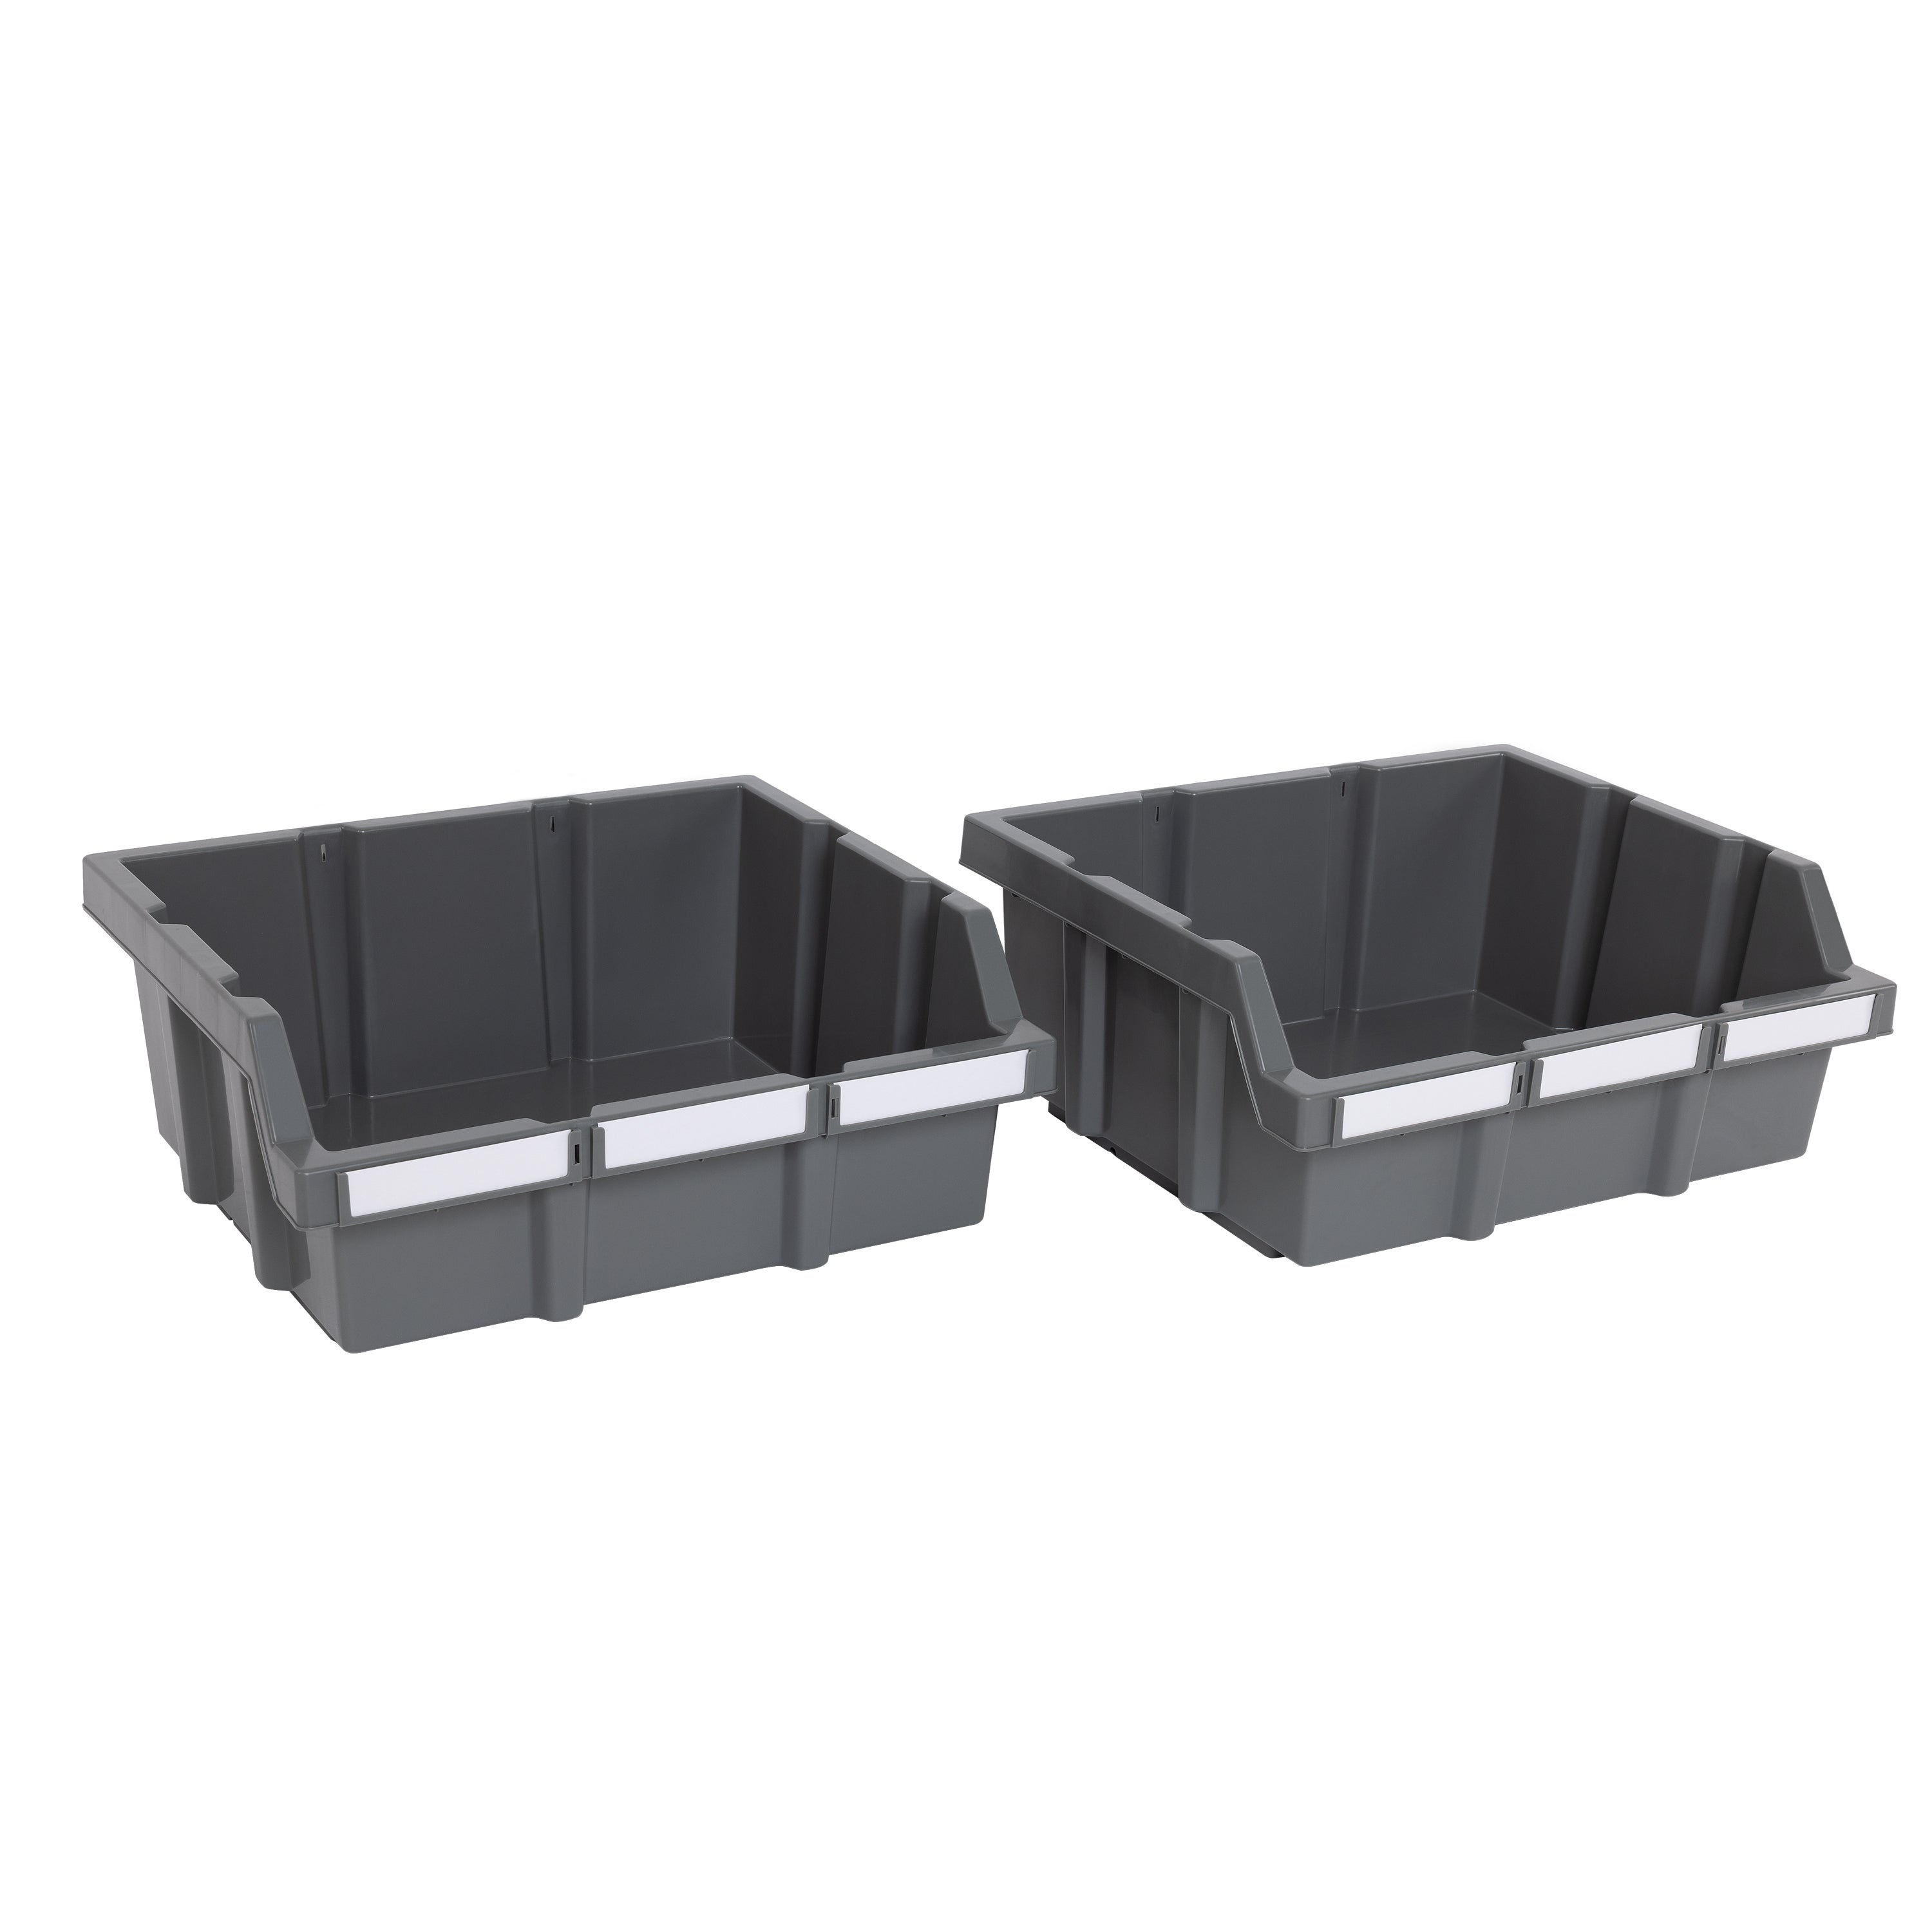 Grey Bins or Dividers for Commercial Bin Rack – Seville Classics